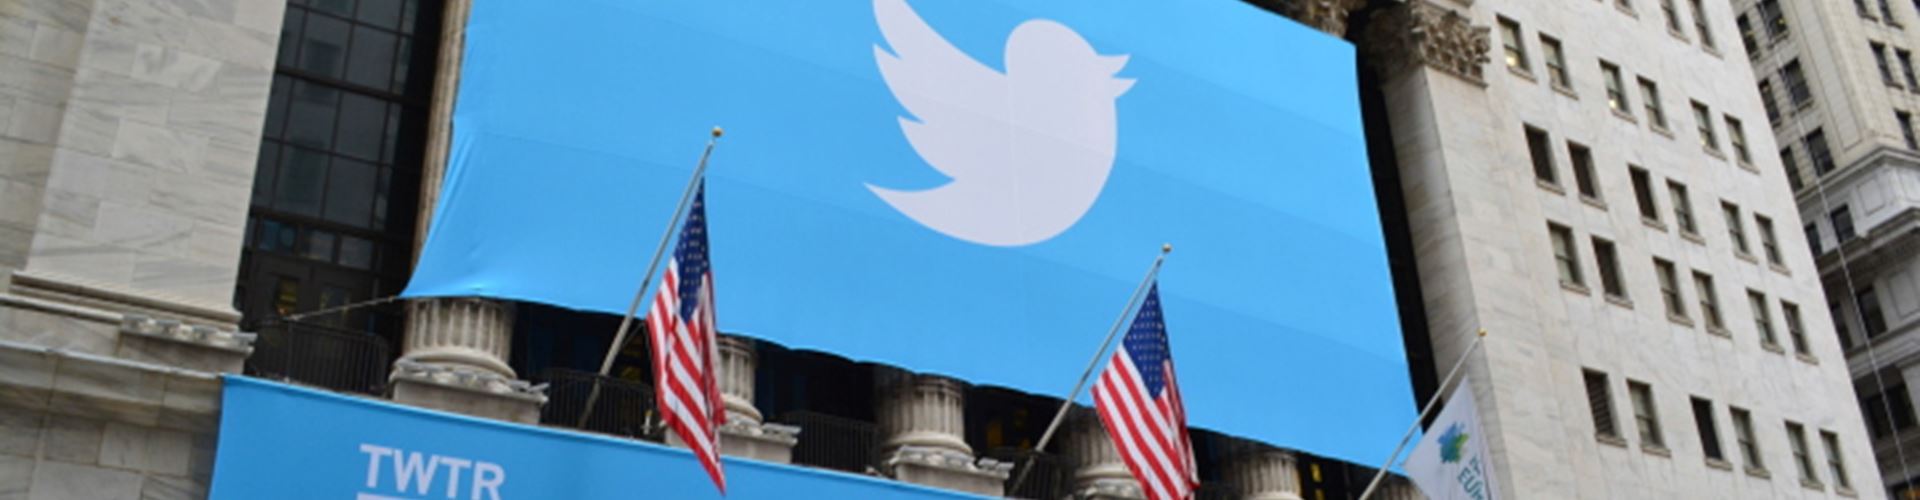 Twitter to acquire talent business Niche for $30m